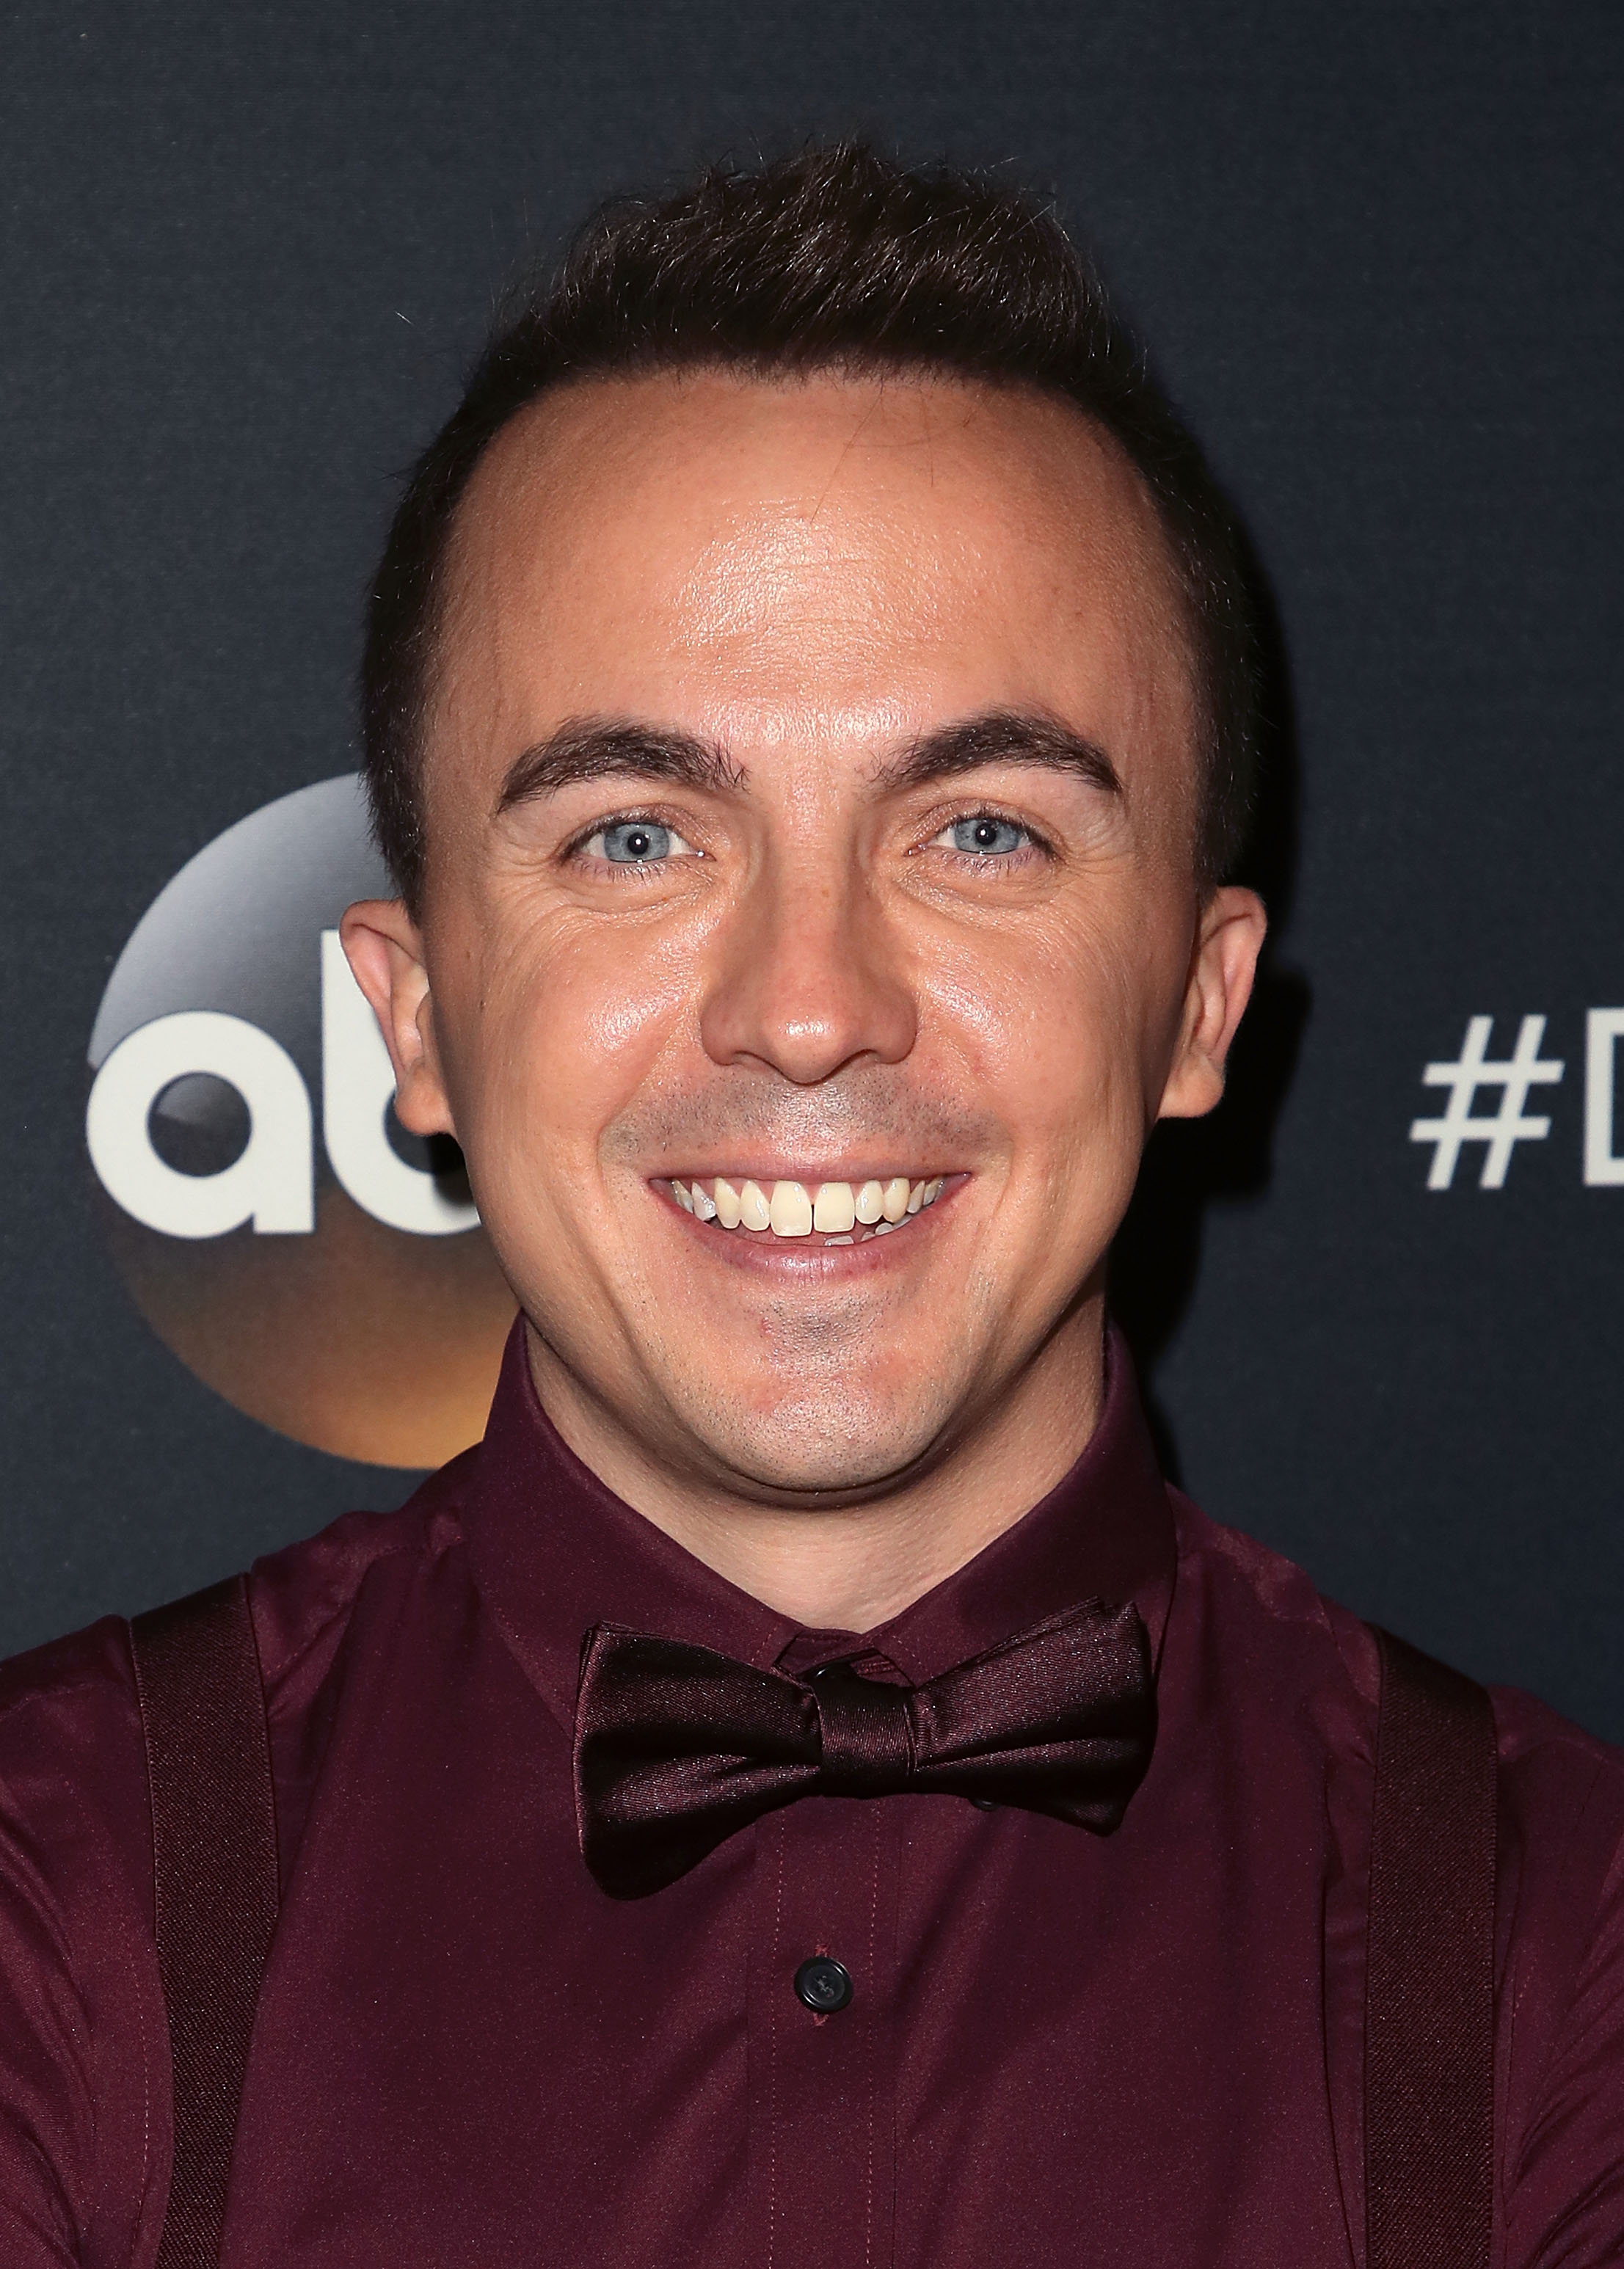 Frankie Muniz posing for a picture during season 27 of "Dancing with the Stars" on October 1, 2018, in California. | Source: Getty Images